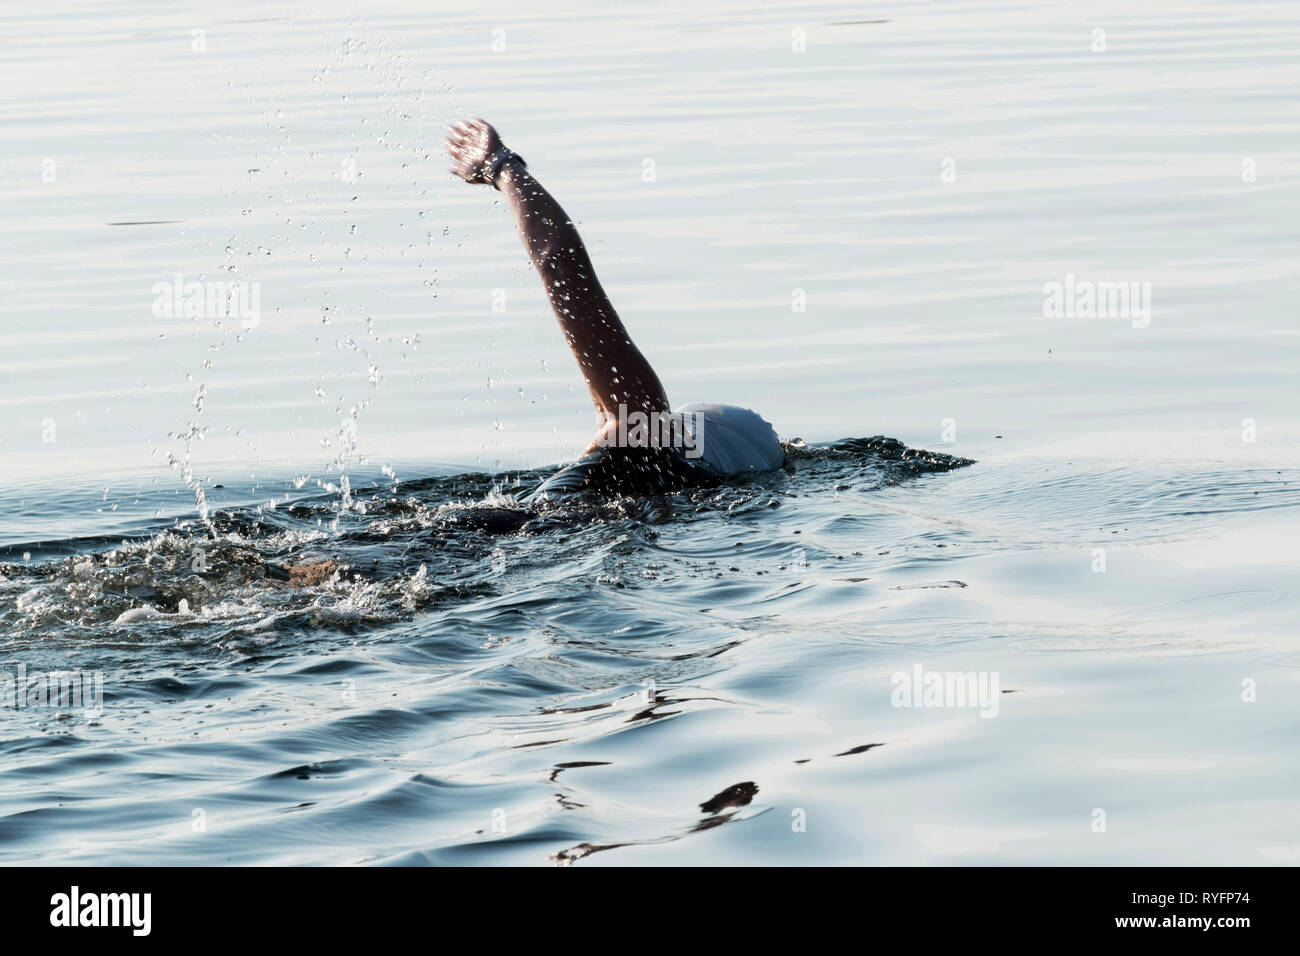 https://c8.alamy.com/comp/RYFP74/a-women-goes-for-her-morning-swim-in-the-cold-waters-of-maine-wearing-a-black-no-sleeved-wet-suit-and-a-white-bathing-cap-RYFP74.jpg